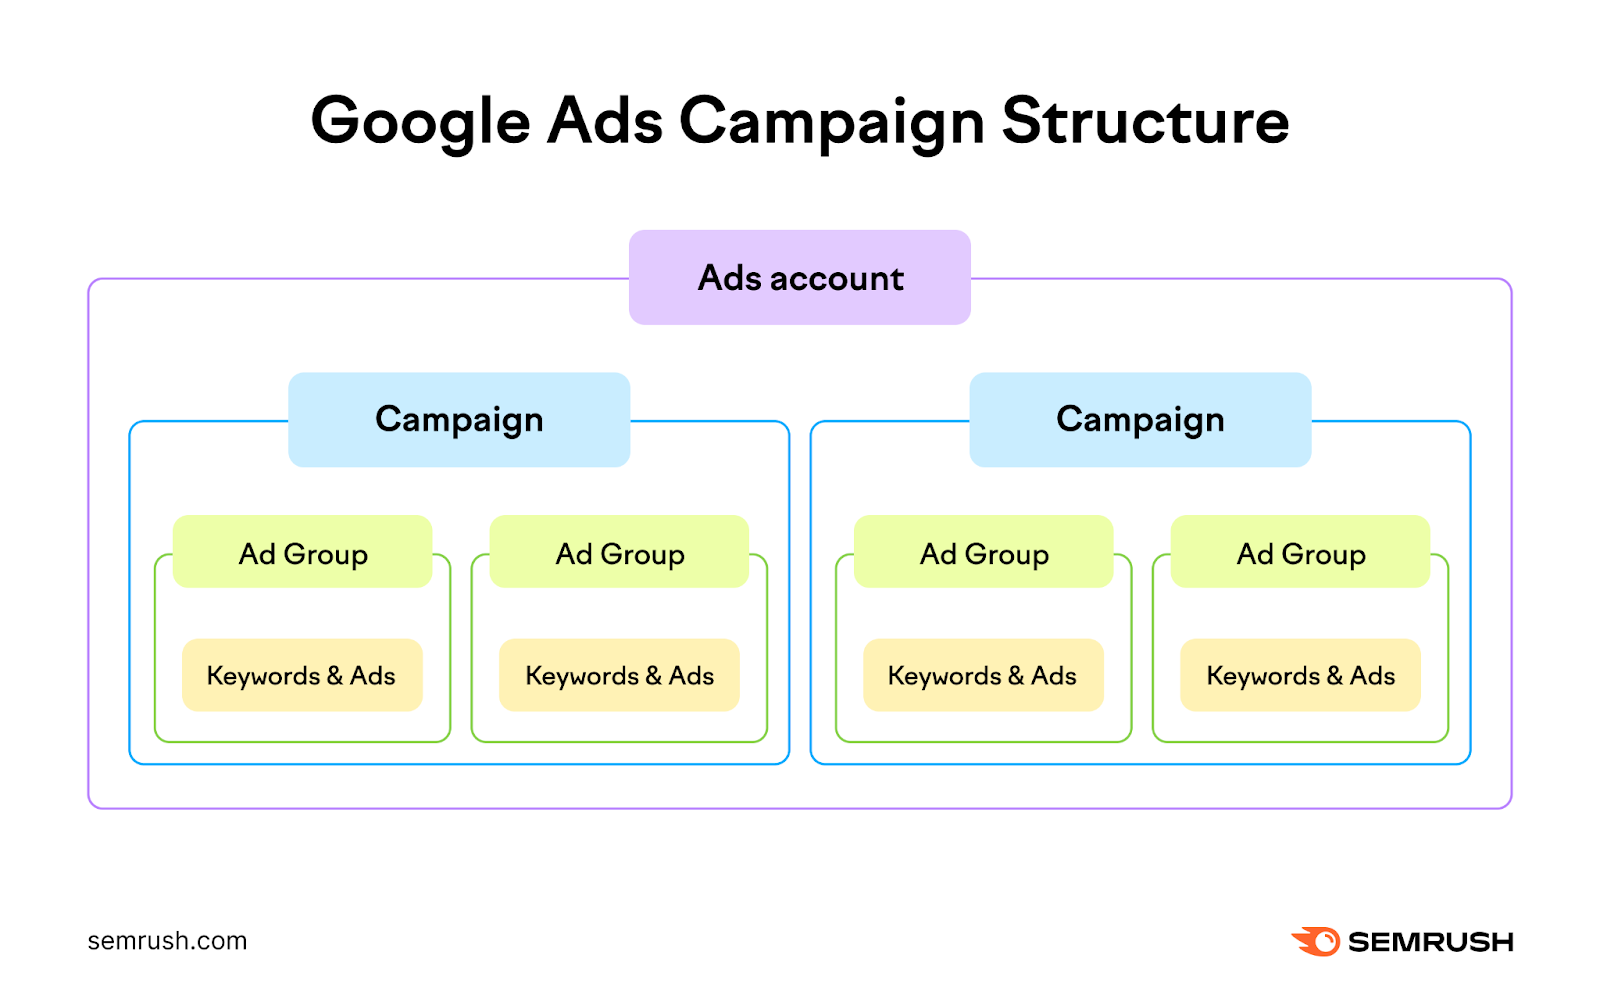 a visual illustration of Google Ads campaign structure